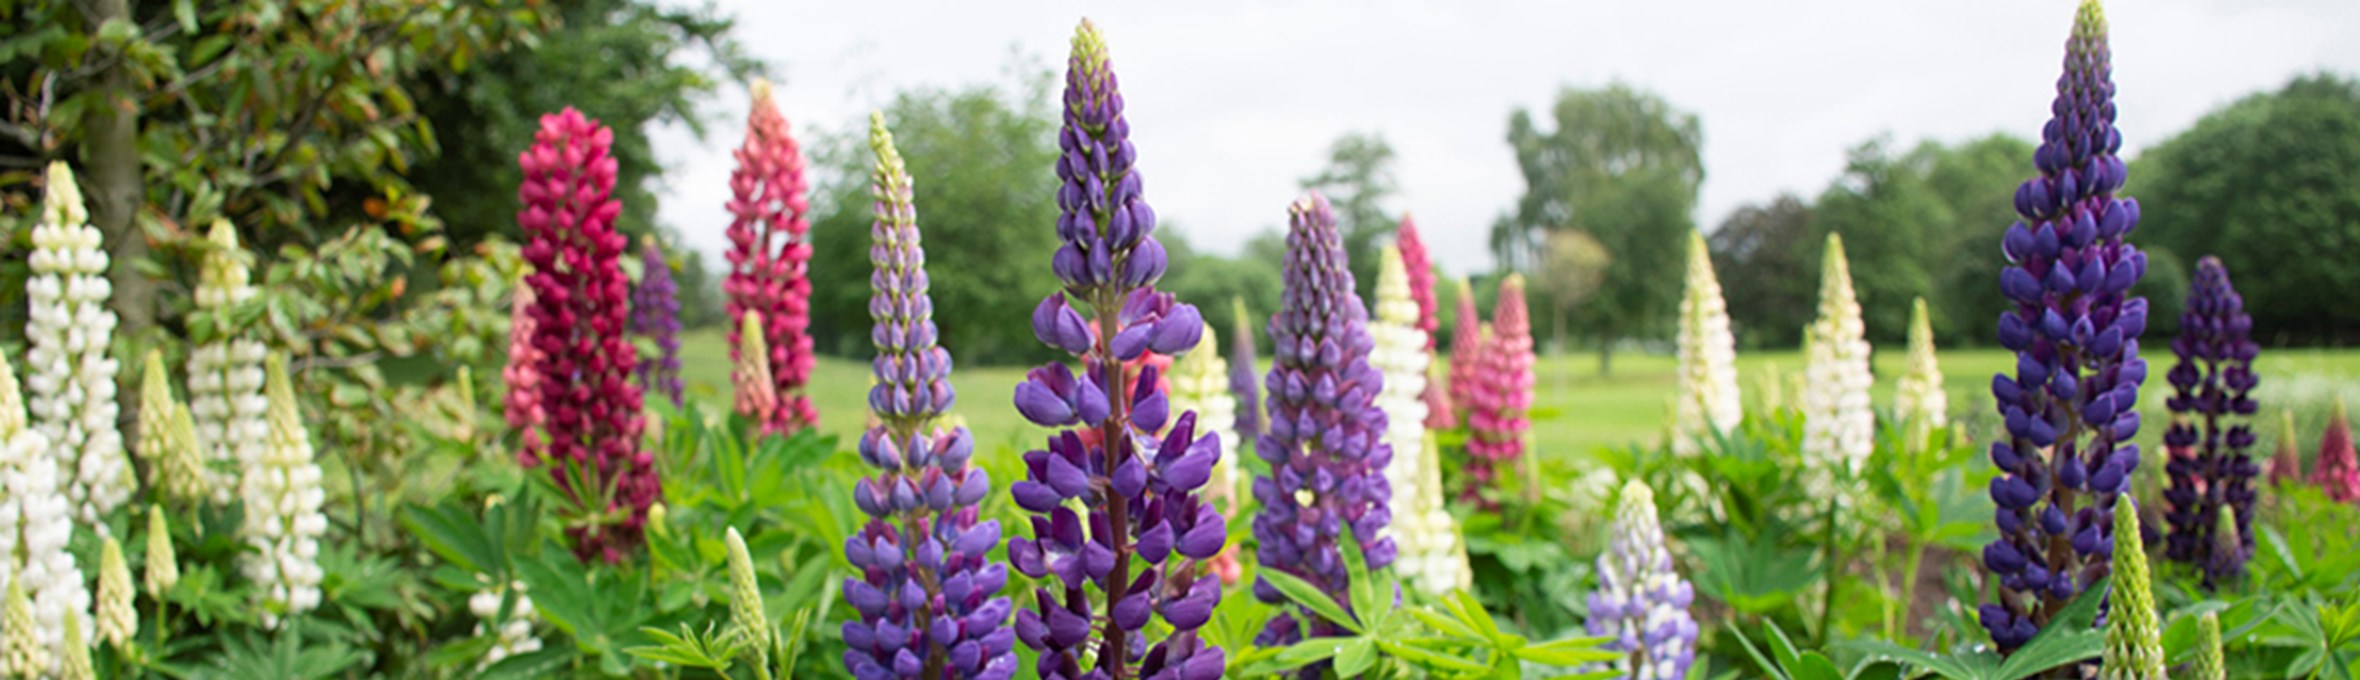 colourful lupin flowers